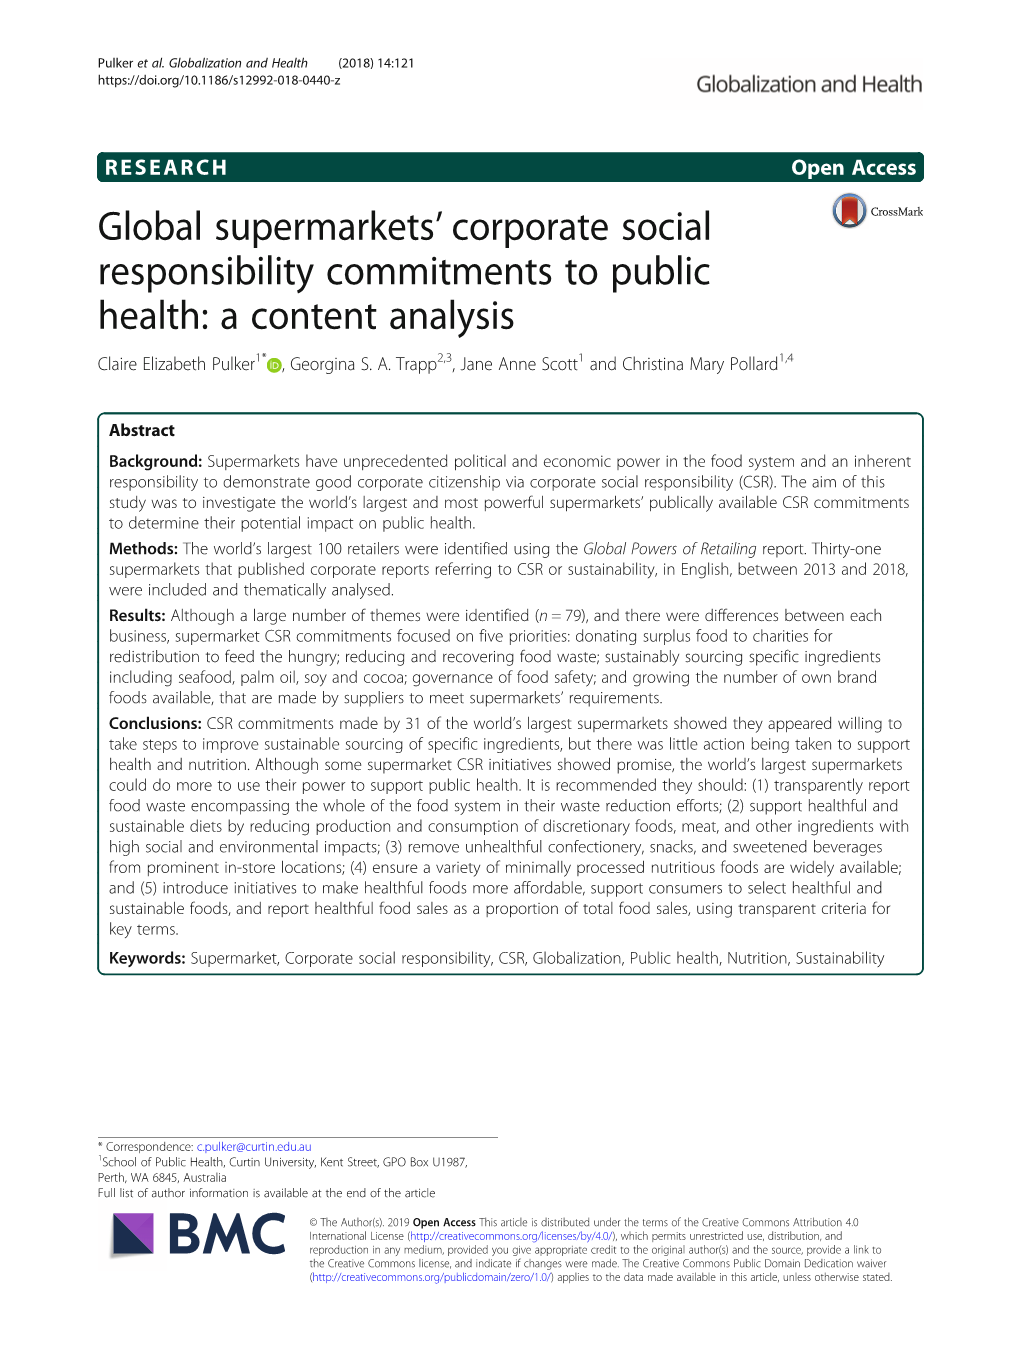 Global Supermarkets' Corporate Social